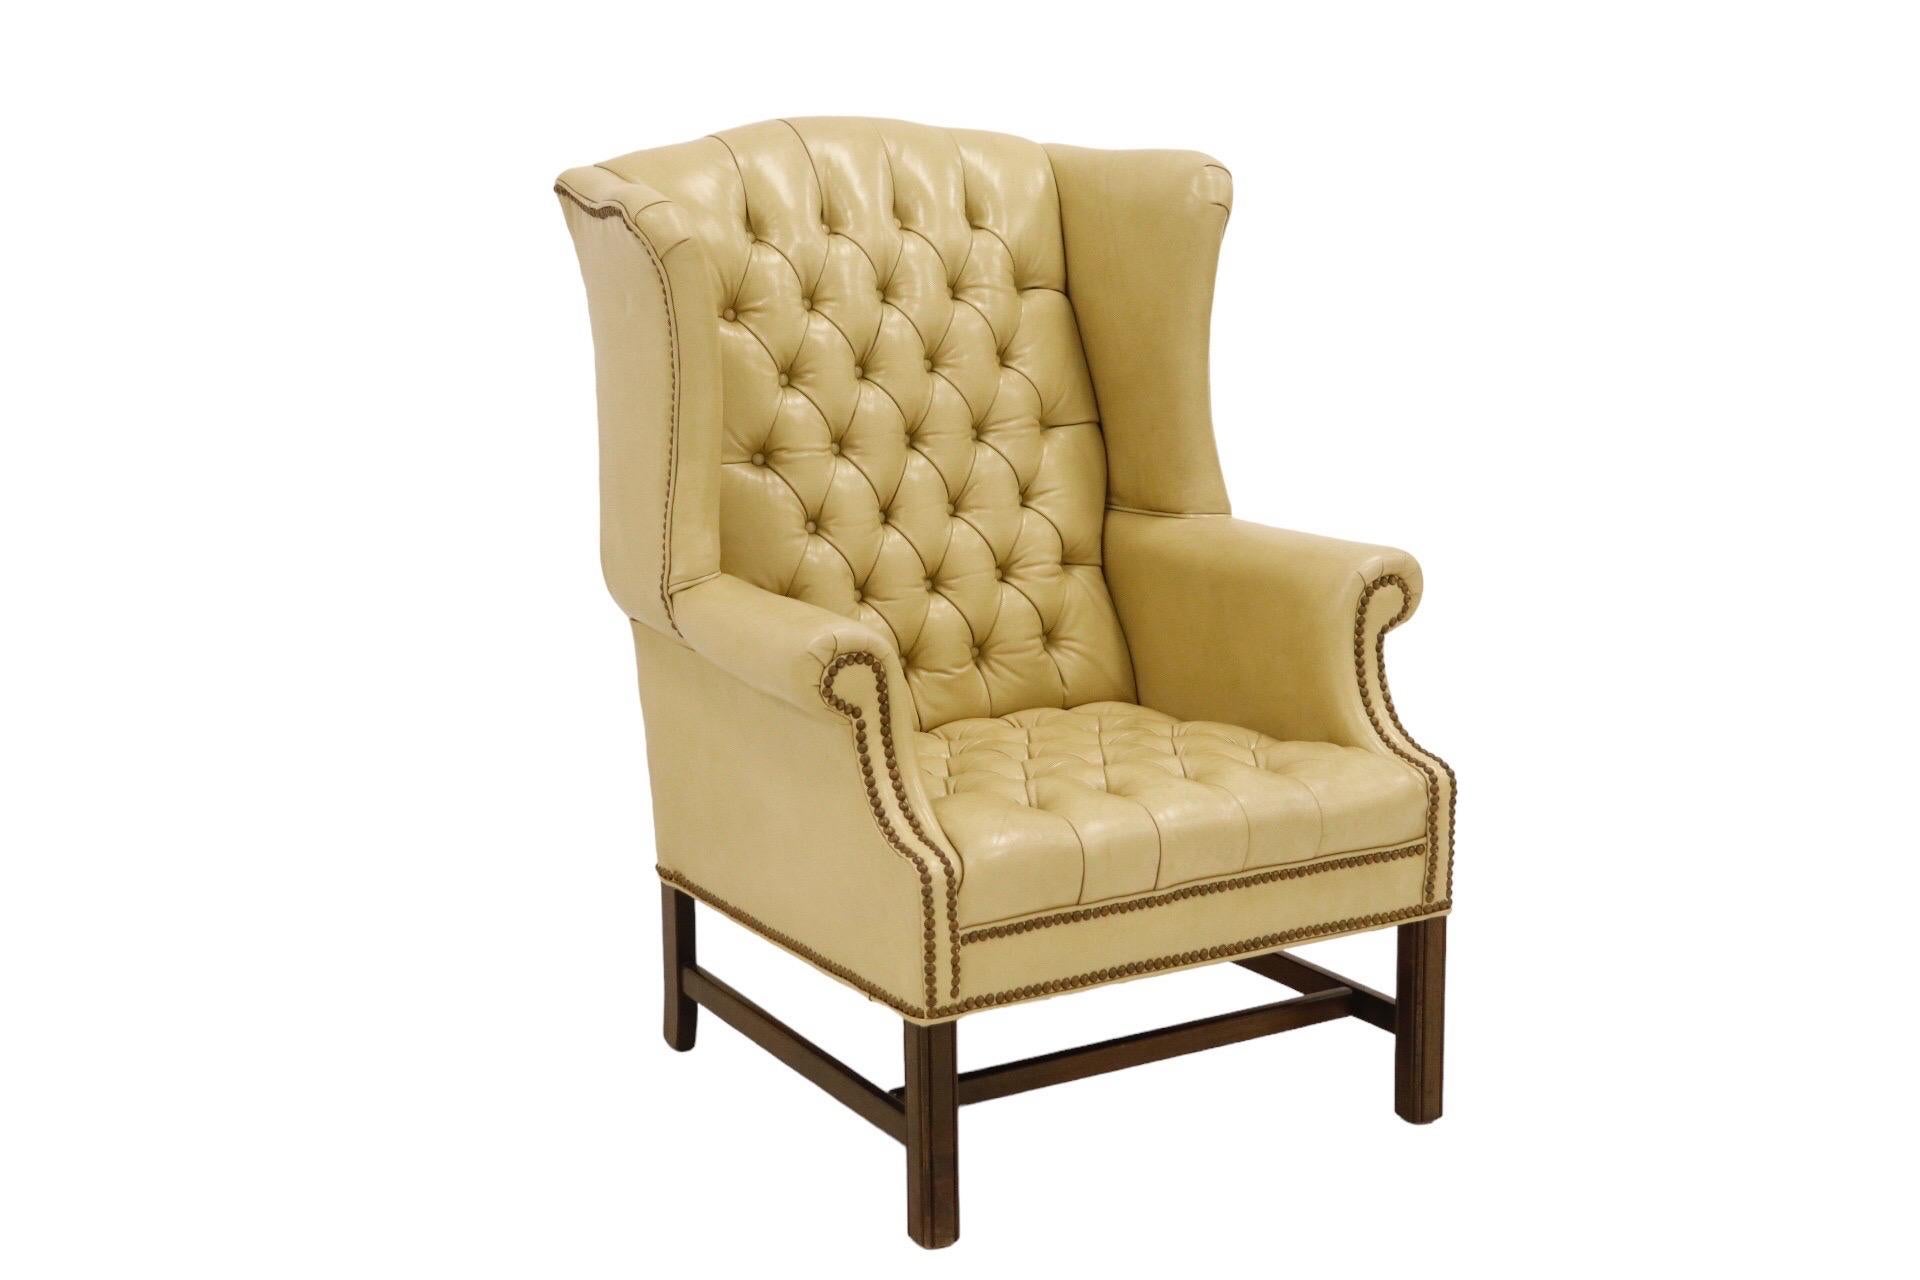 A leather tufted Chippendale wingback in cream. Diamond button tufted on the inside back and seat, secured on rolled arms, across the front skirt and around the base with a brass nailhead trim. Straight square legs with a beveled line detail are